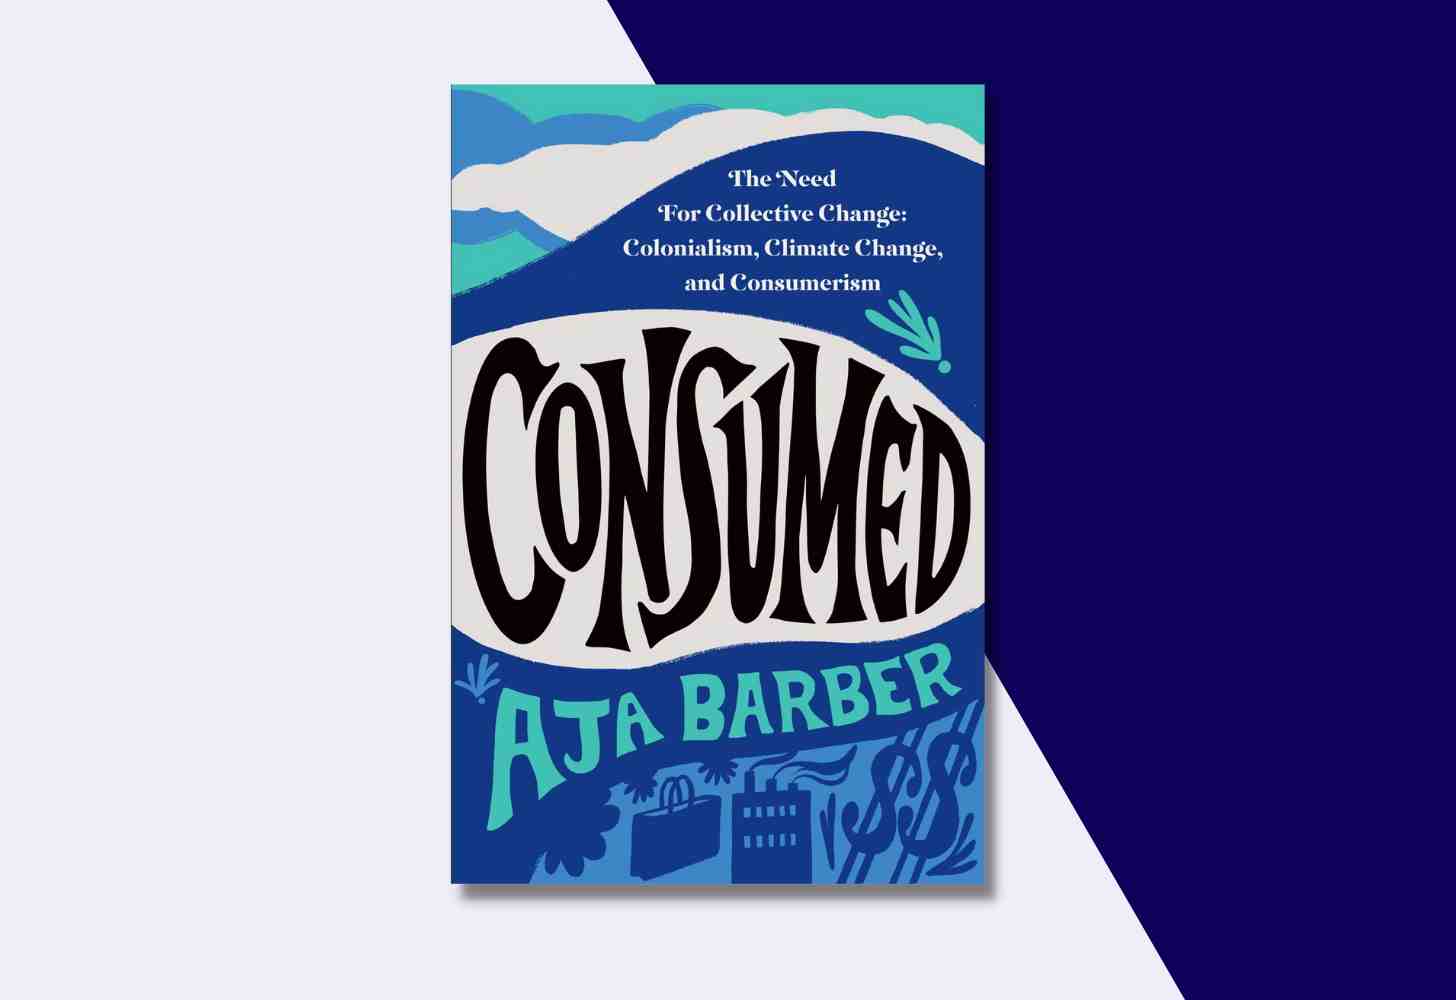 The Cover Of “Consumed: The Need for Collective Change: Colonialism, Climate Change, and Consumerism” by Aja Barber